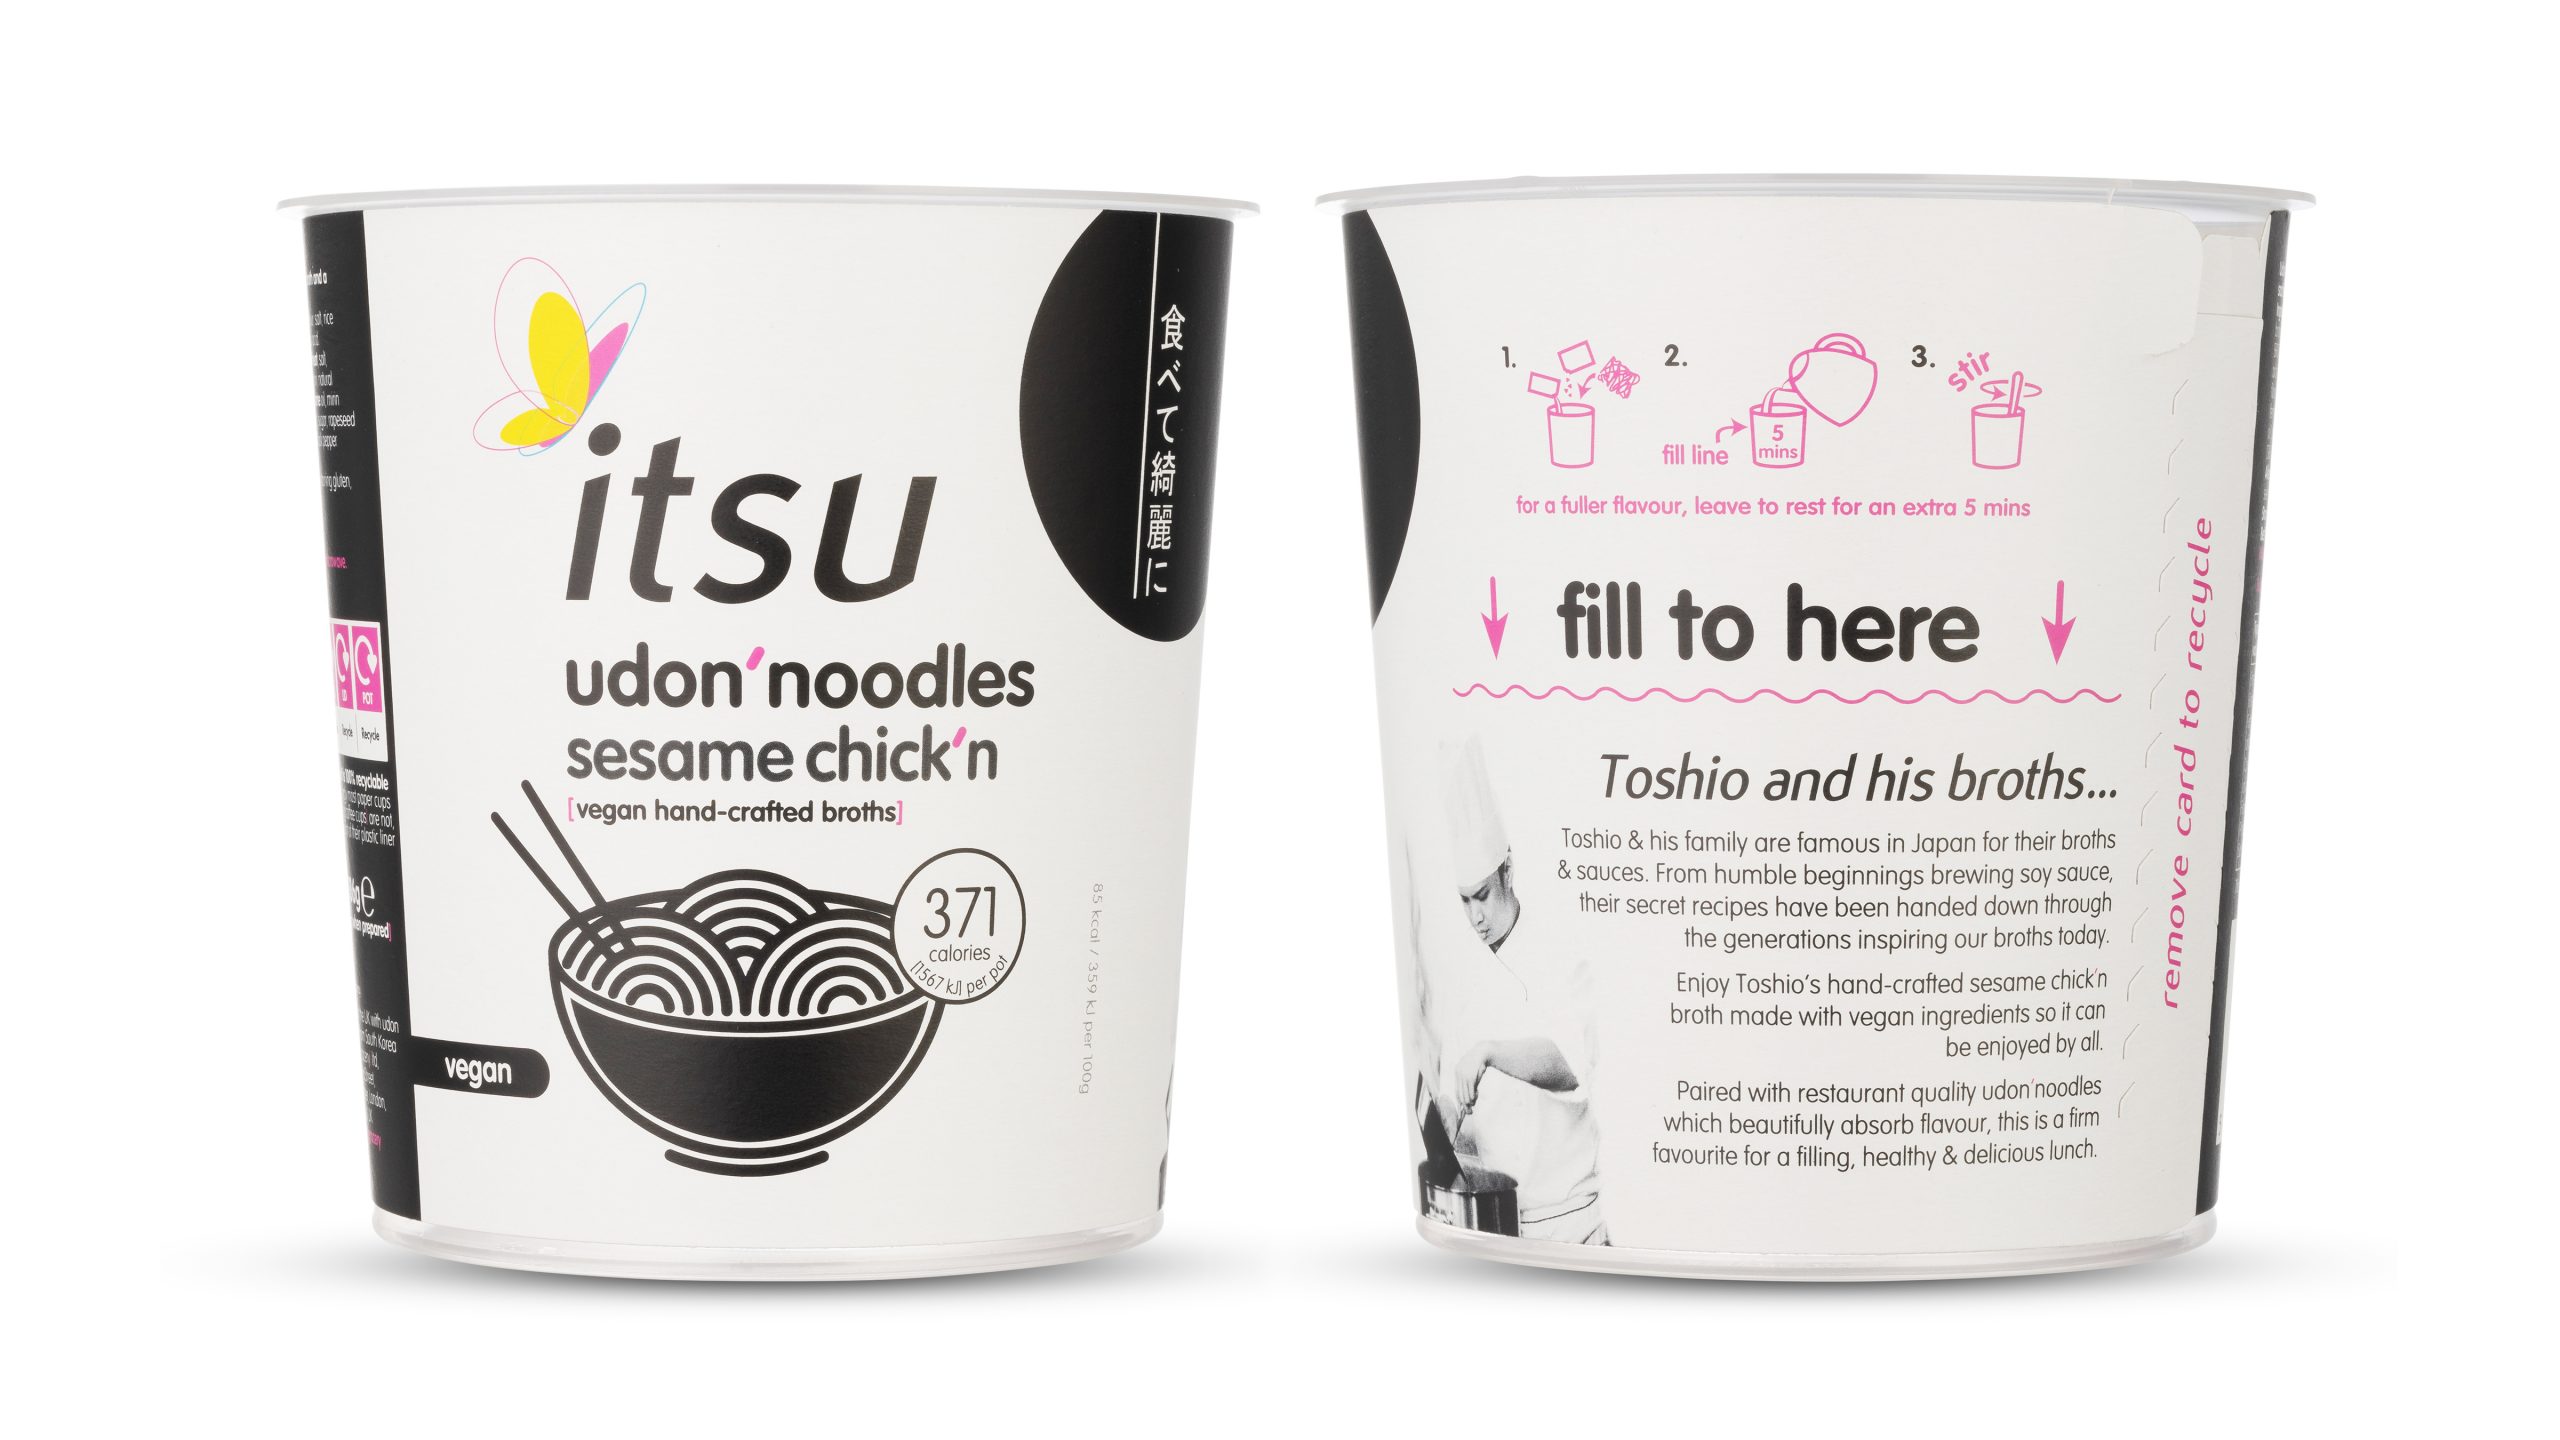 Itsu swaps to more sustainable instant noodle packaging